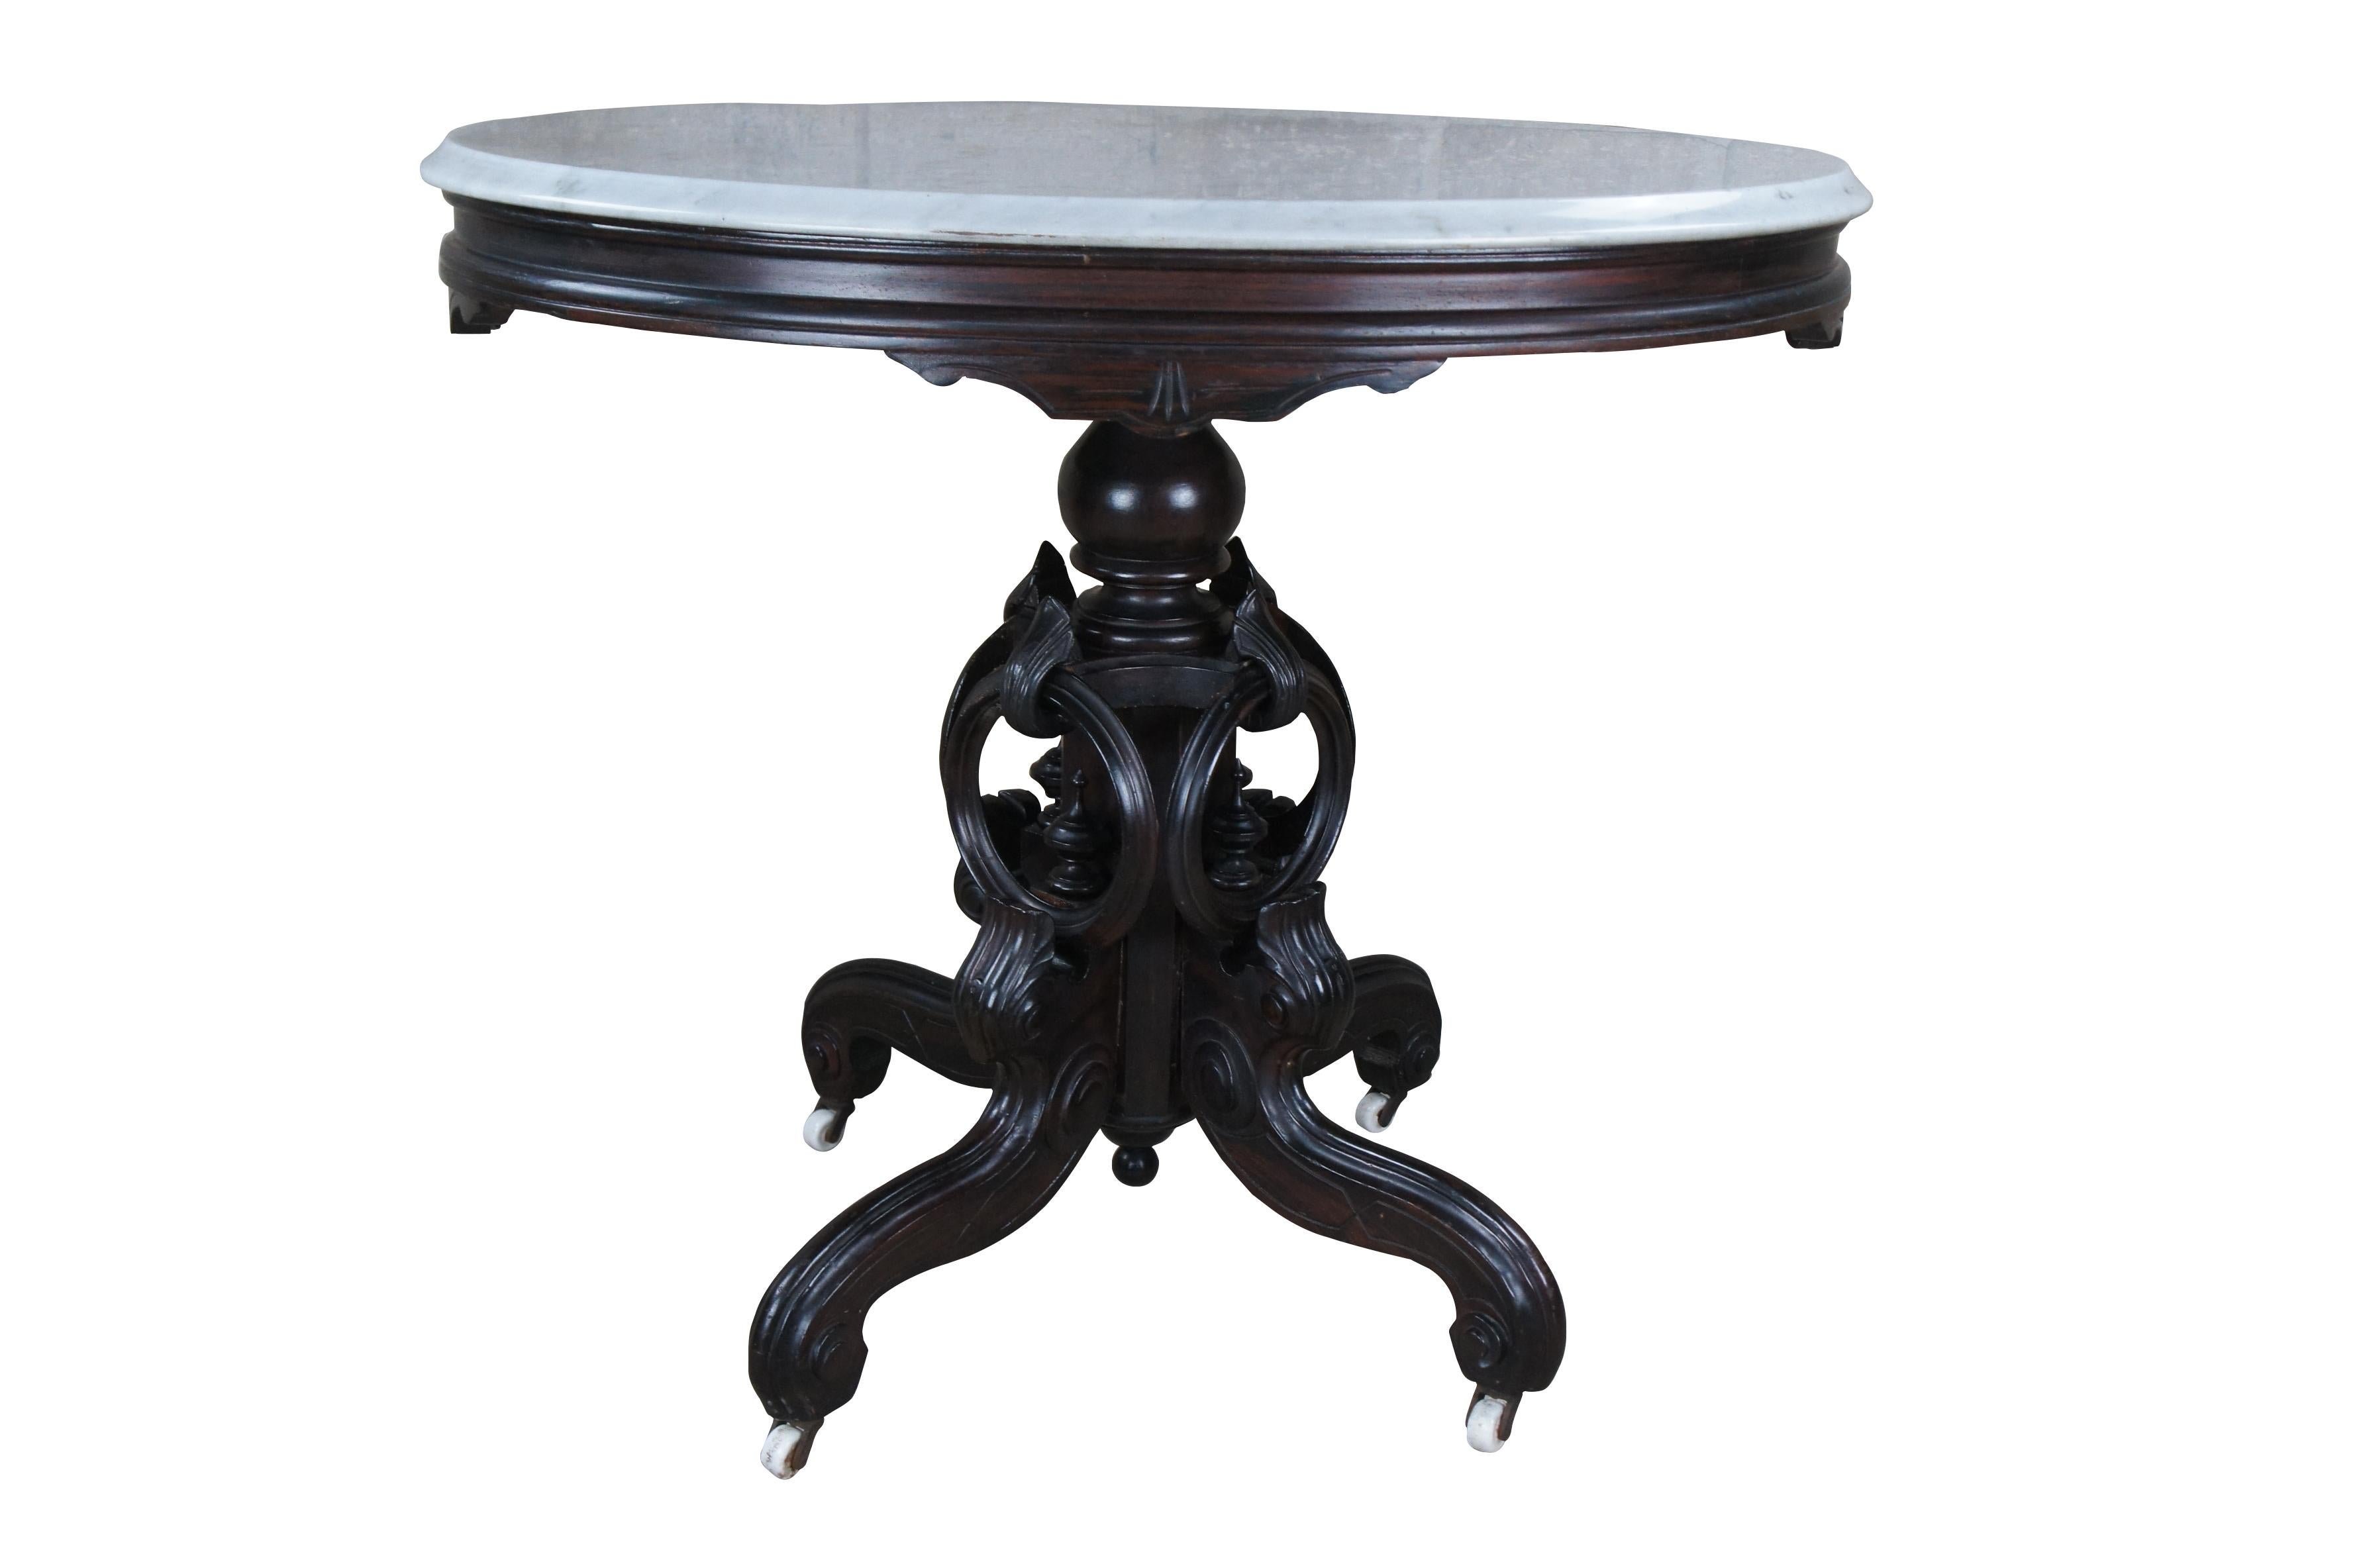 Antique Victorian Eastlake parlor table with Rosewood painted grain finish featuring an oval top with beveled edge over acanthus leaf accents, rings, finials, and serpentine legs.

Made by Chadwick & Sweet of Dayton Ohio, part of the White